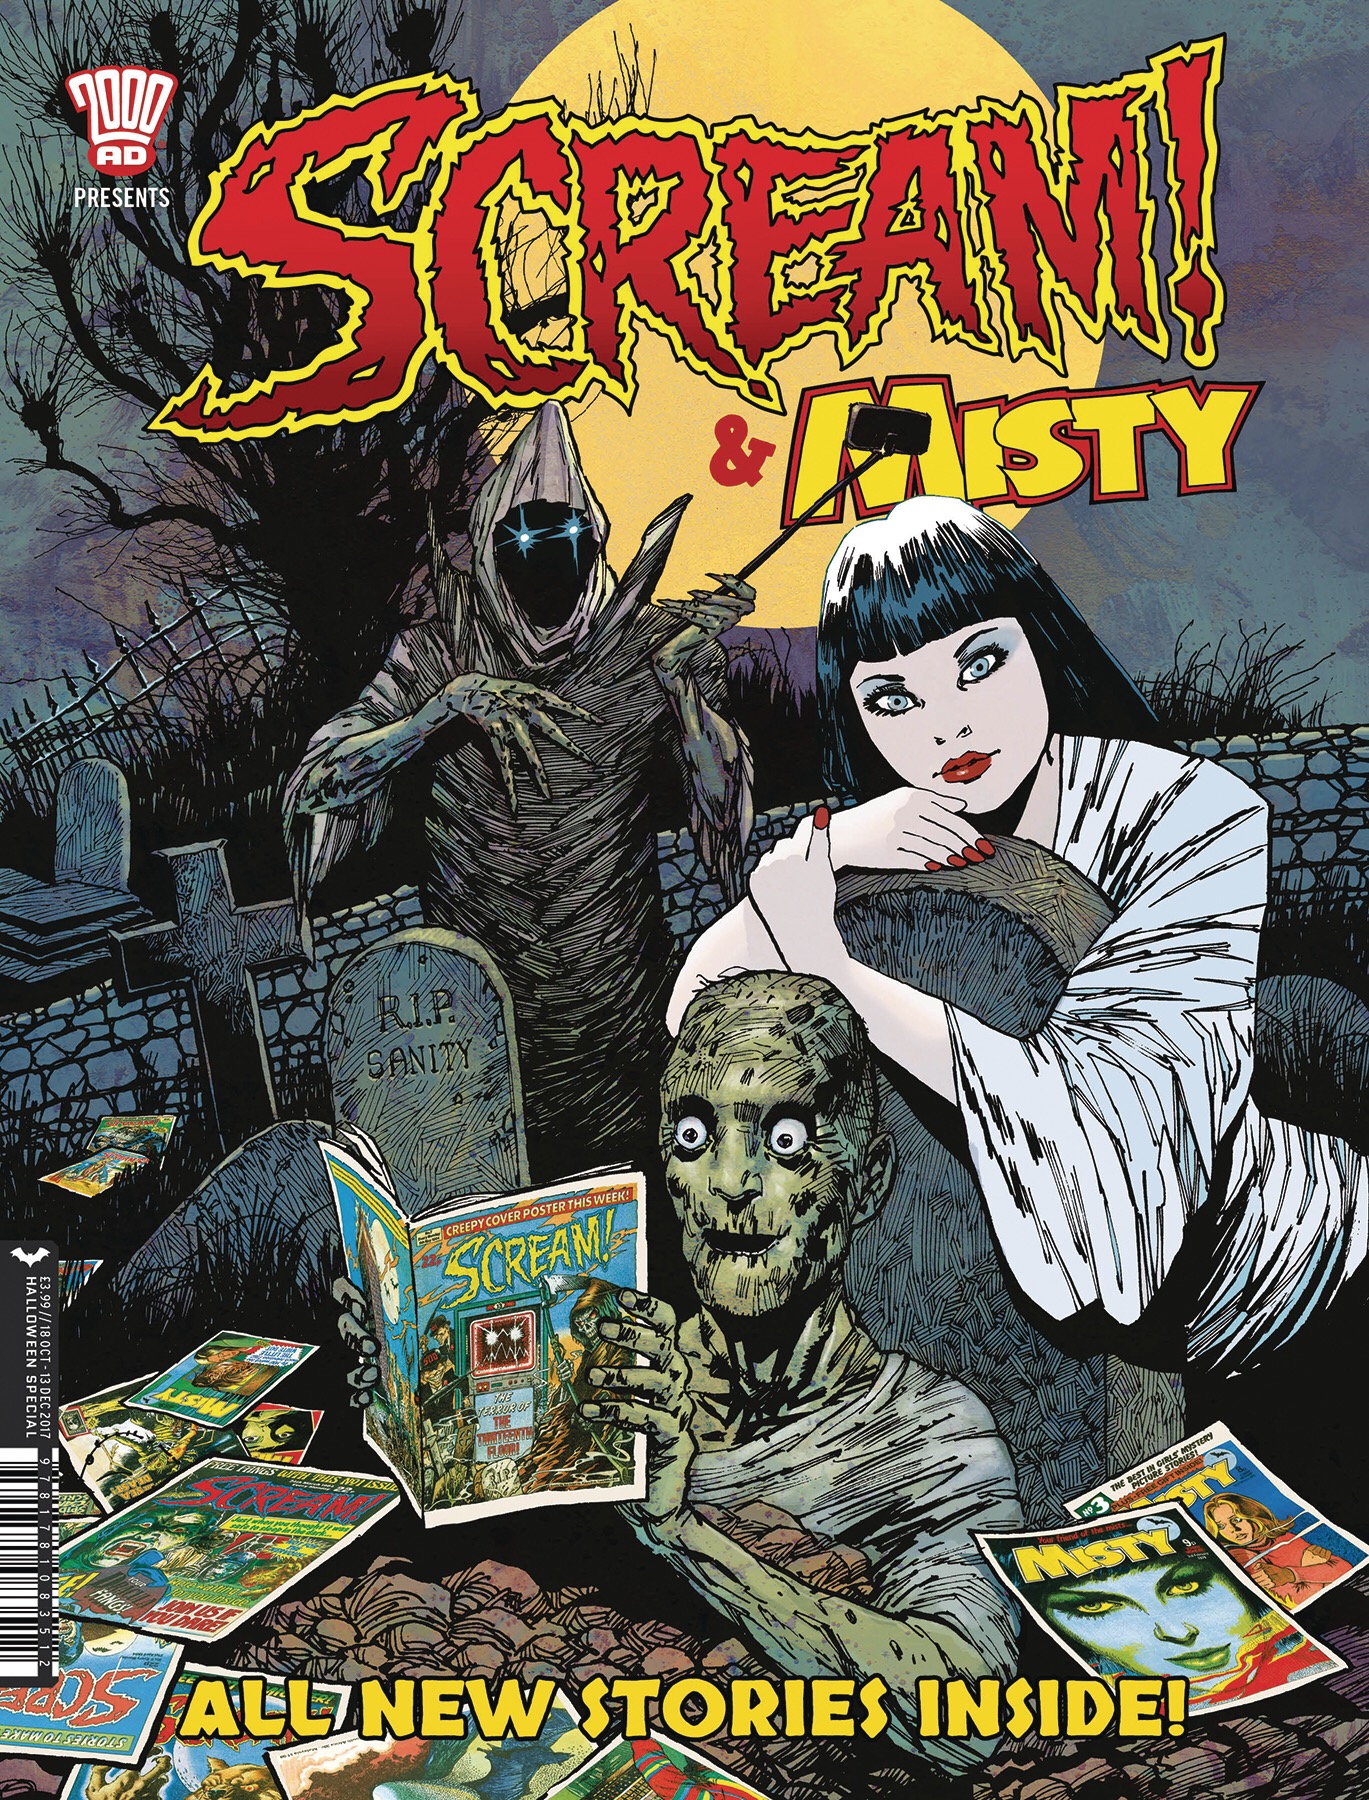 Scream & Misty Halloween Special 2017 - Cover